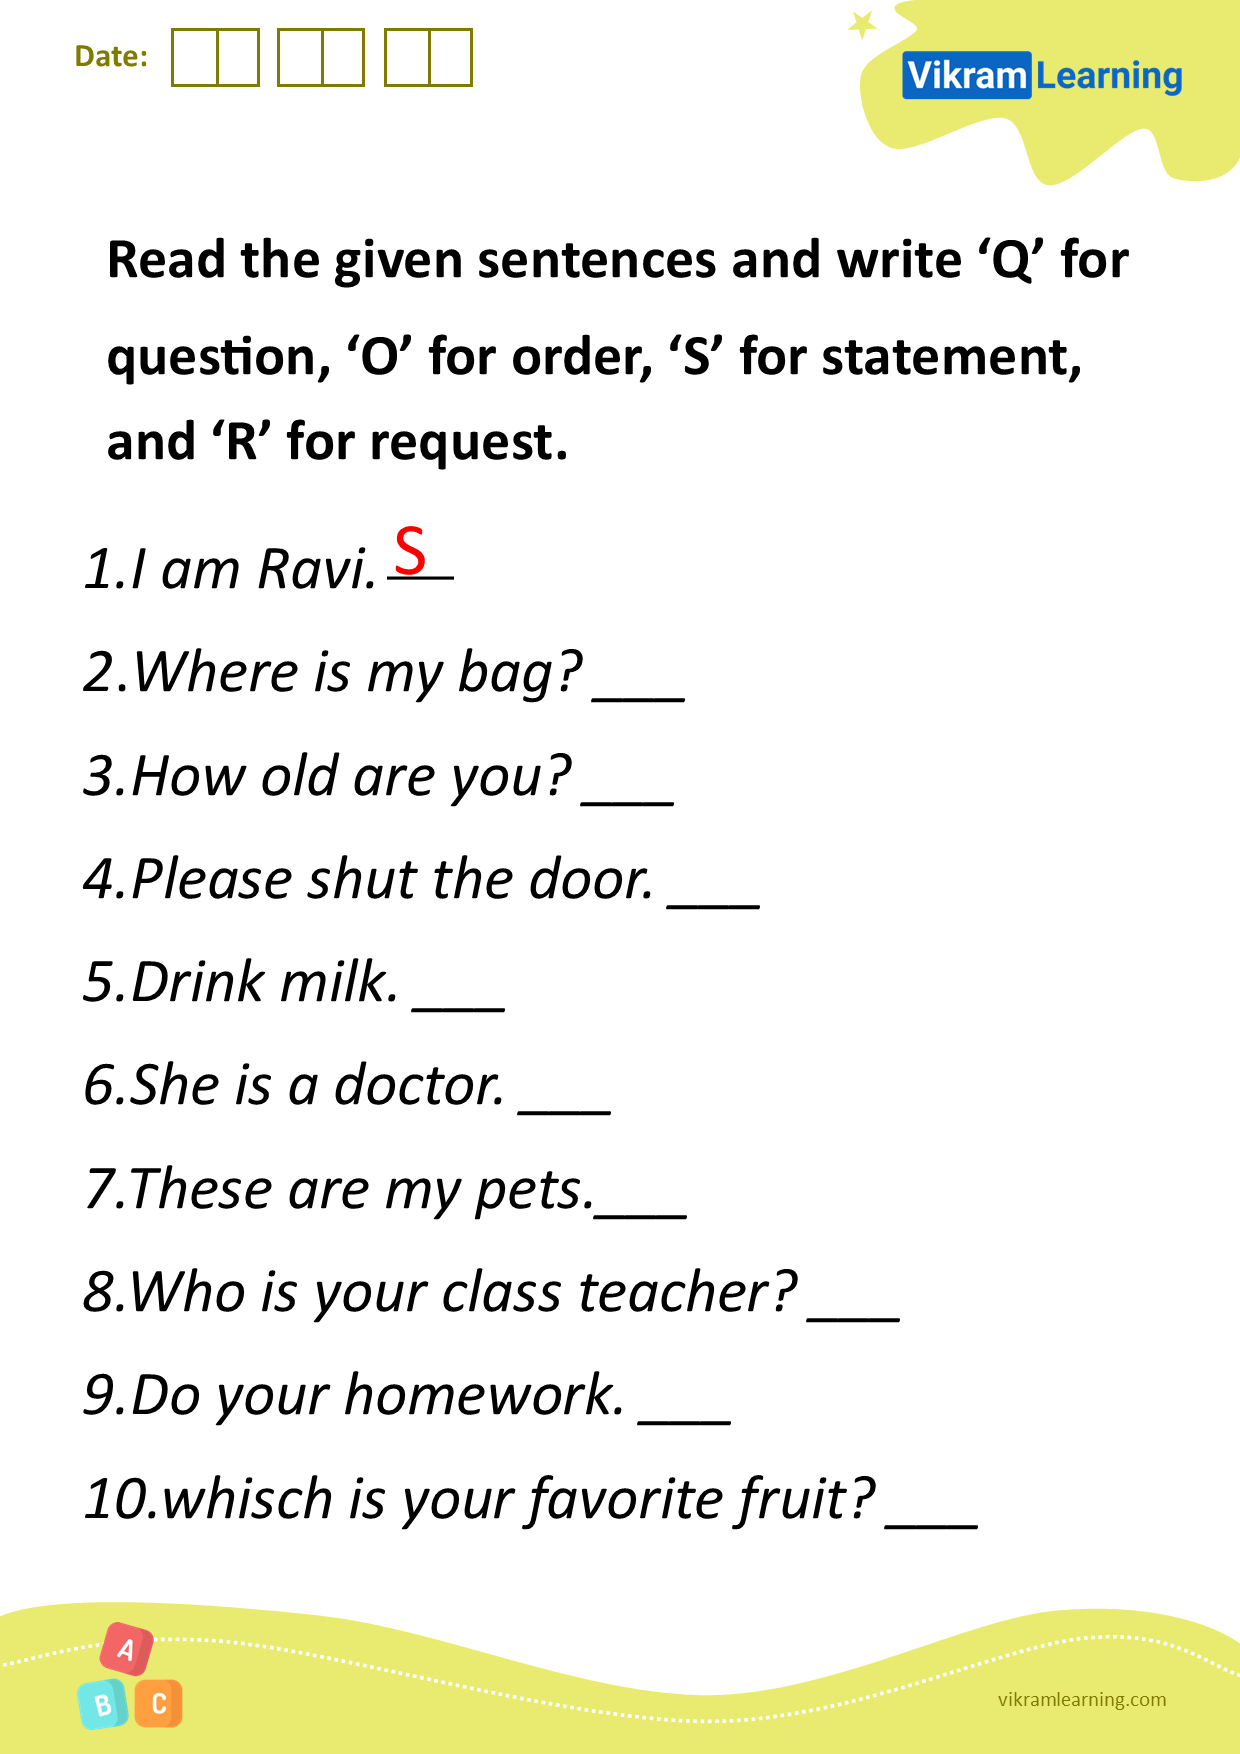 download-read-the-given-sentences-and-write-q-for-the-question-o